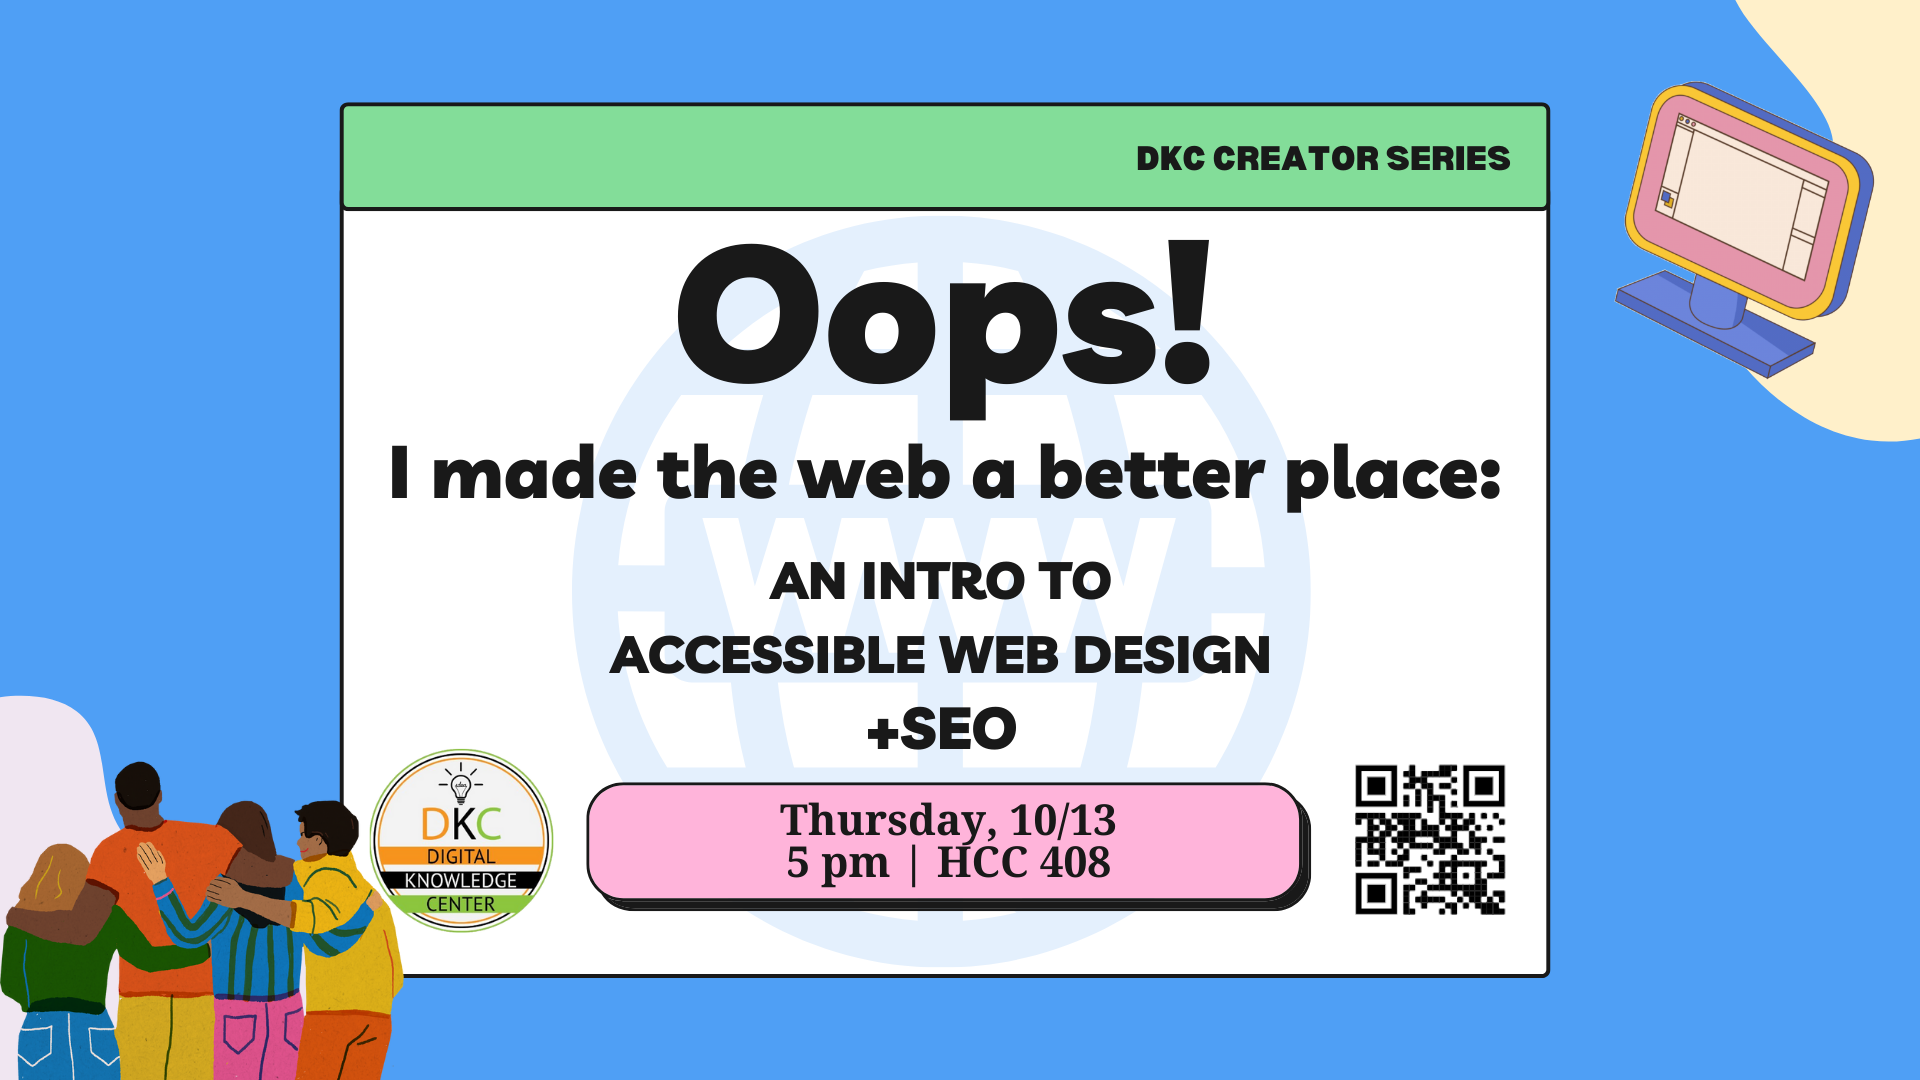 A graphic of the workshop name, date and place that reads, "Oops! I made the web a better place: An Into to Accessible Web Design + SEO. Thursday, 10/13, 5 pm, HCC 408". It also contains a sign-up QR code and the DKC logo.